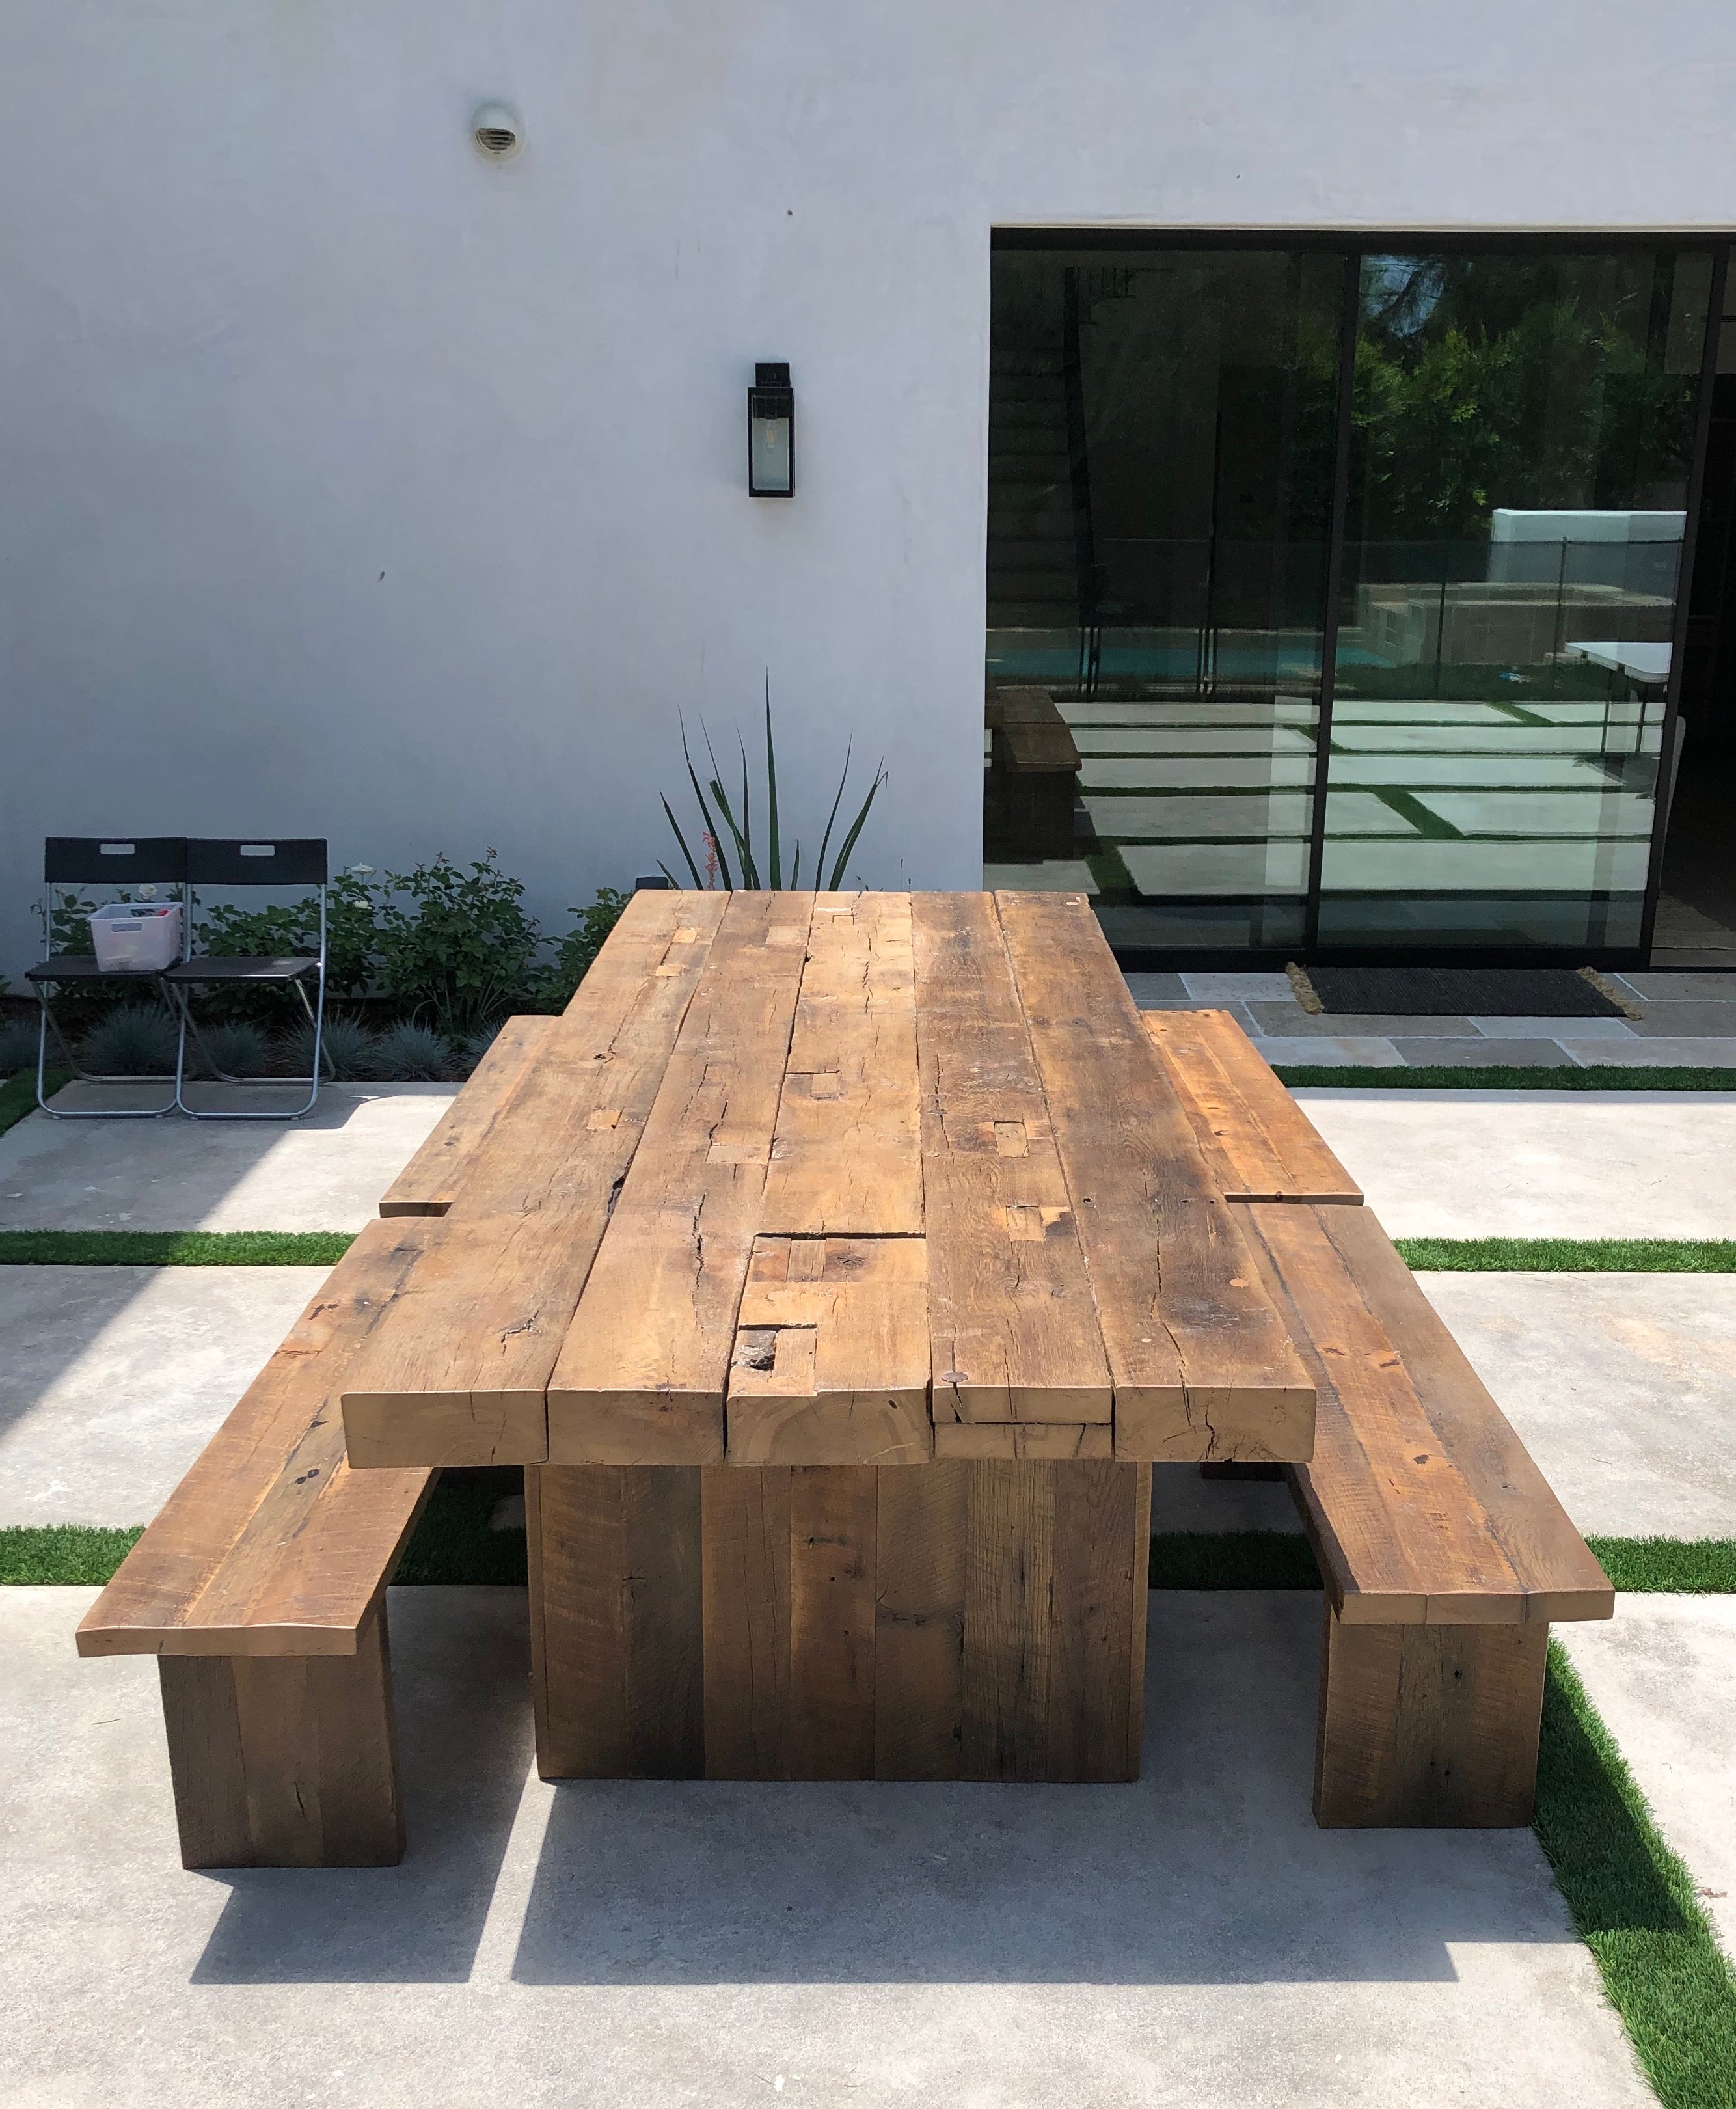 The "GOAT" American Beam Table